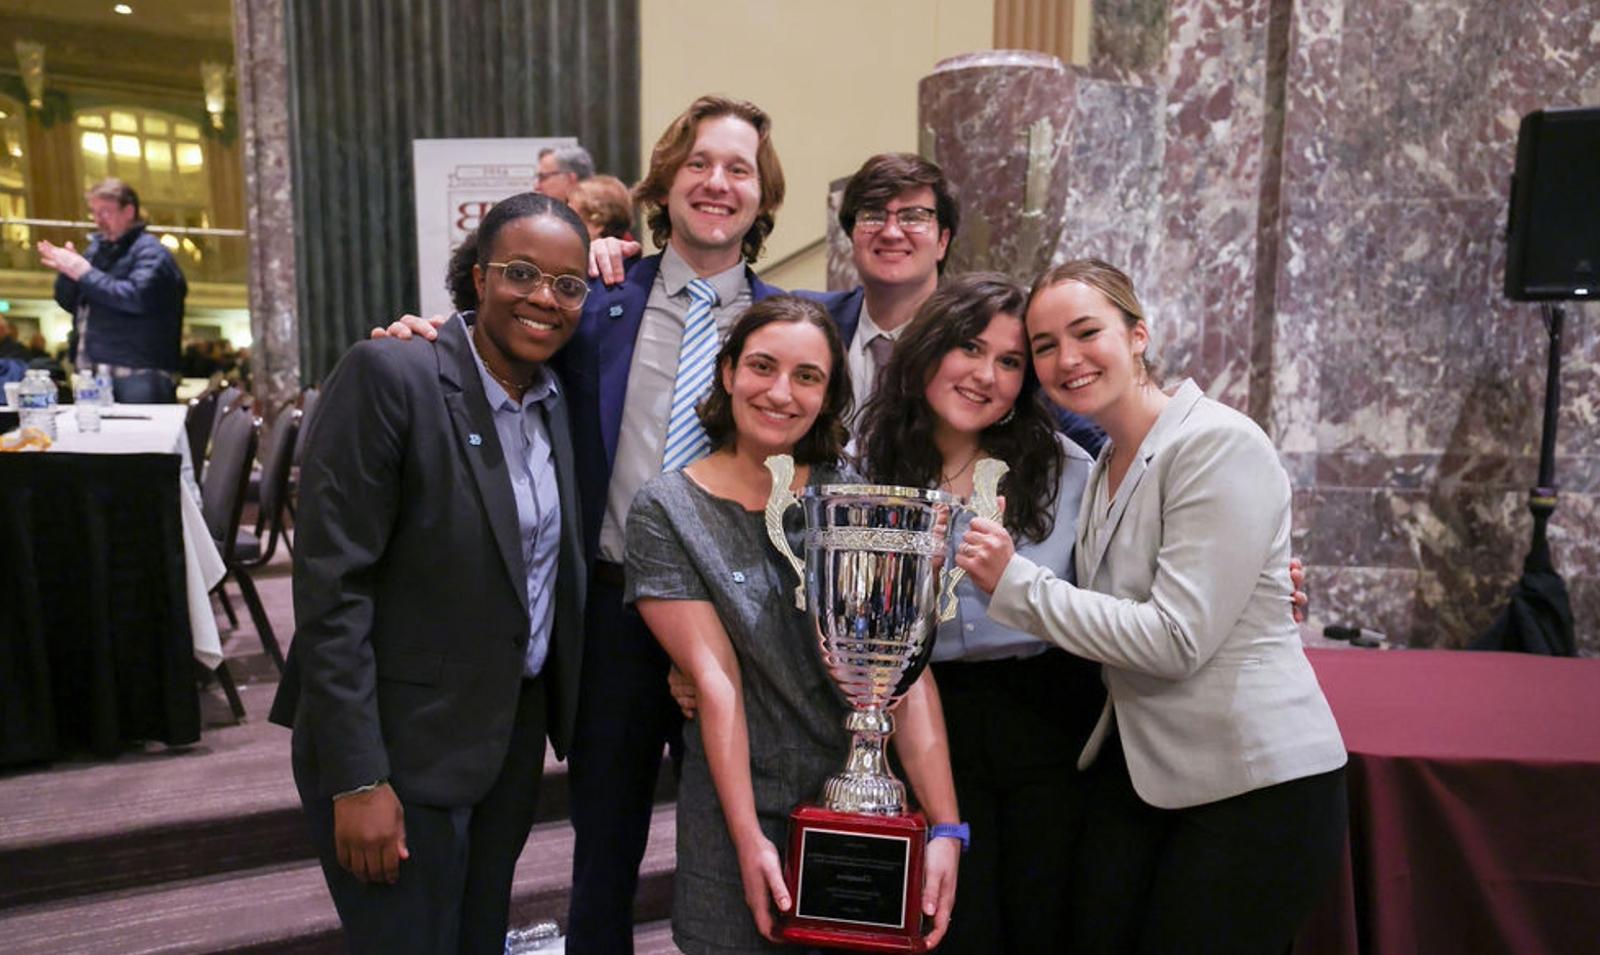 Six members of the UNC Ethics Bowl team posing with award in hands.